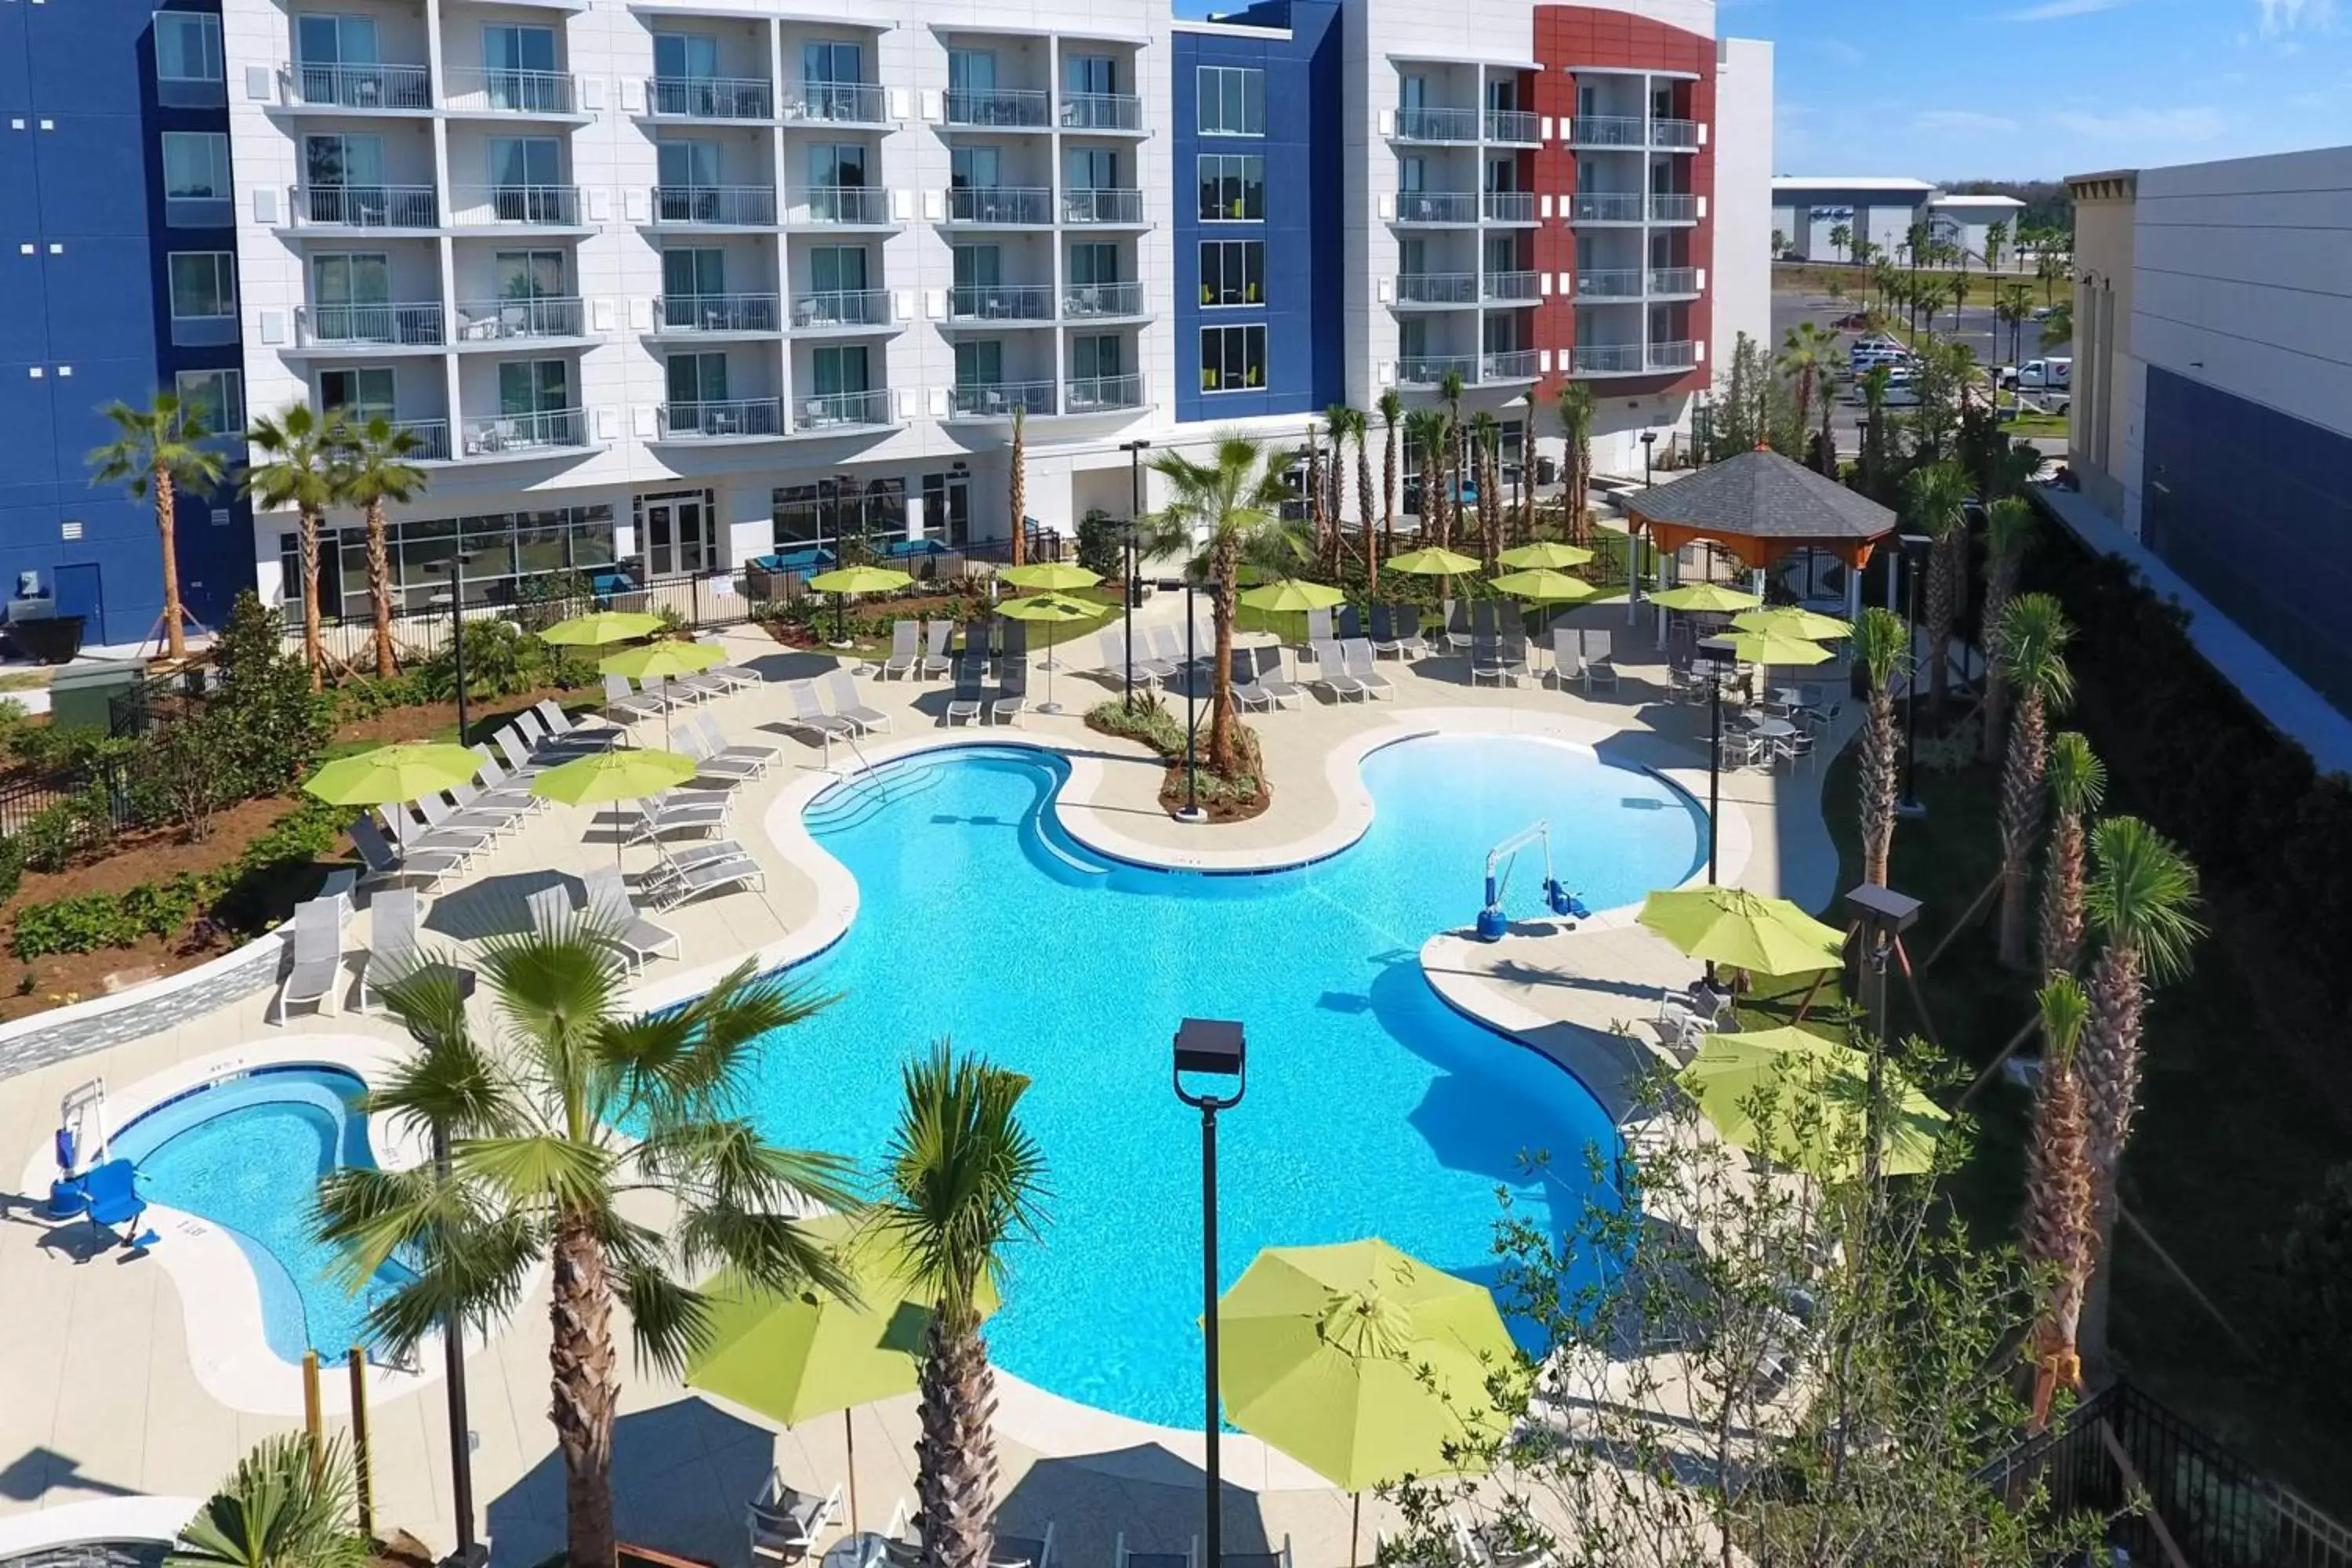 Property building, Pool View in SpringHill Suites Orange Beach at The Wharf